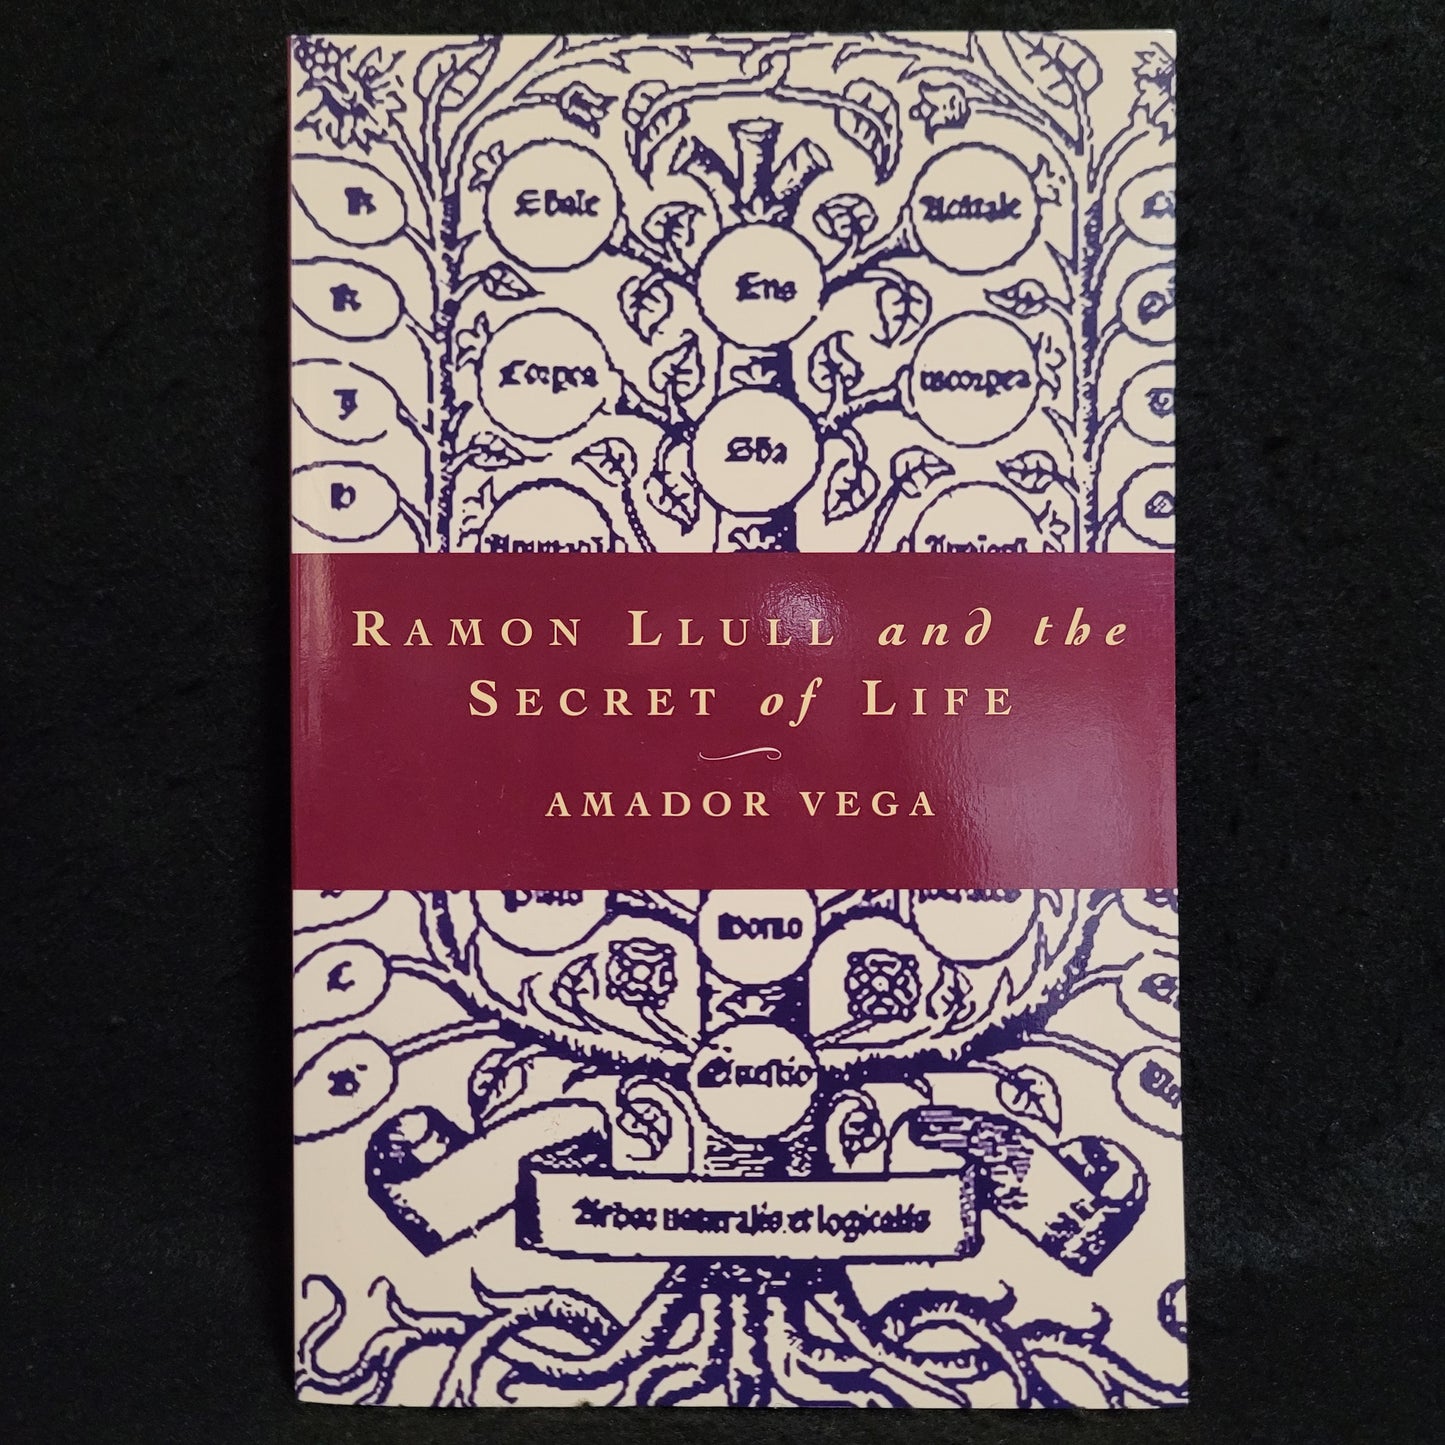 Ramon Llull and the Secret of Life by Amador Vega (The Crossroad Publishing Company, 2002) Paperback